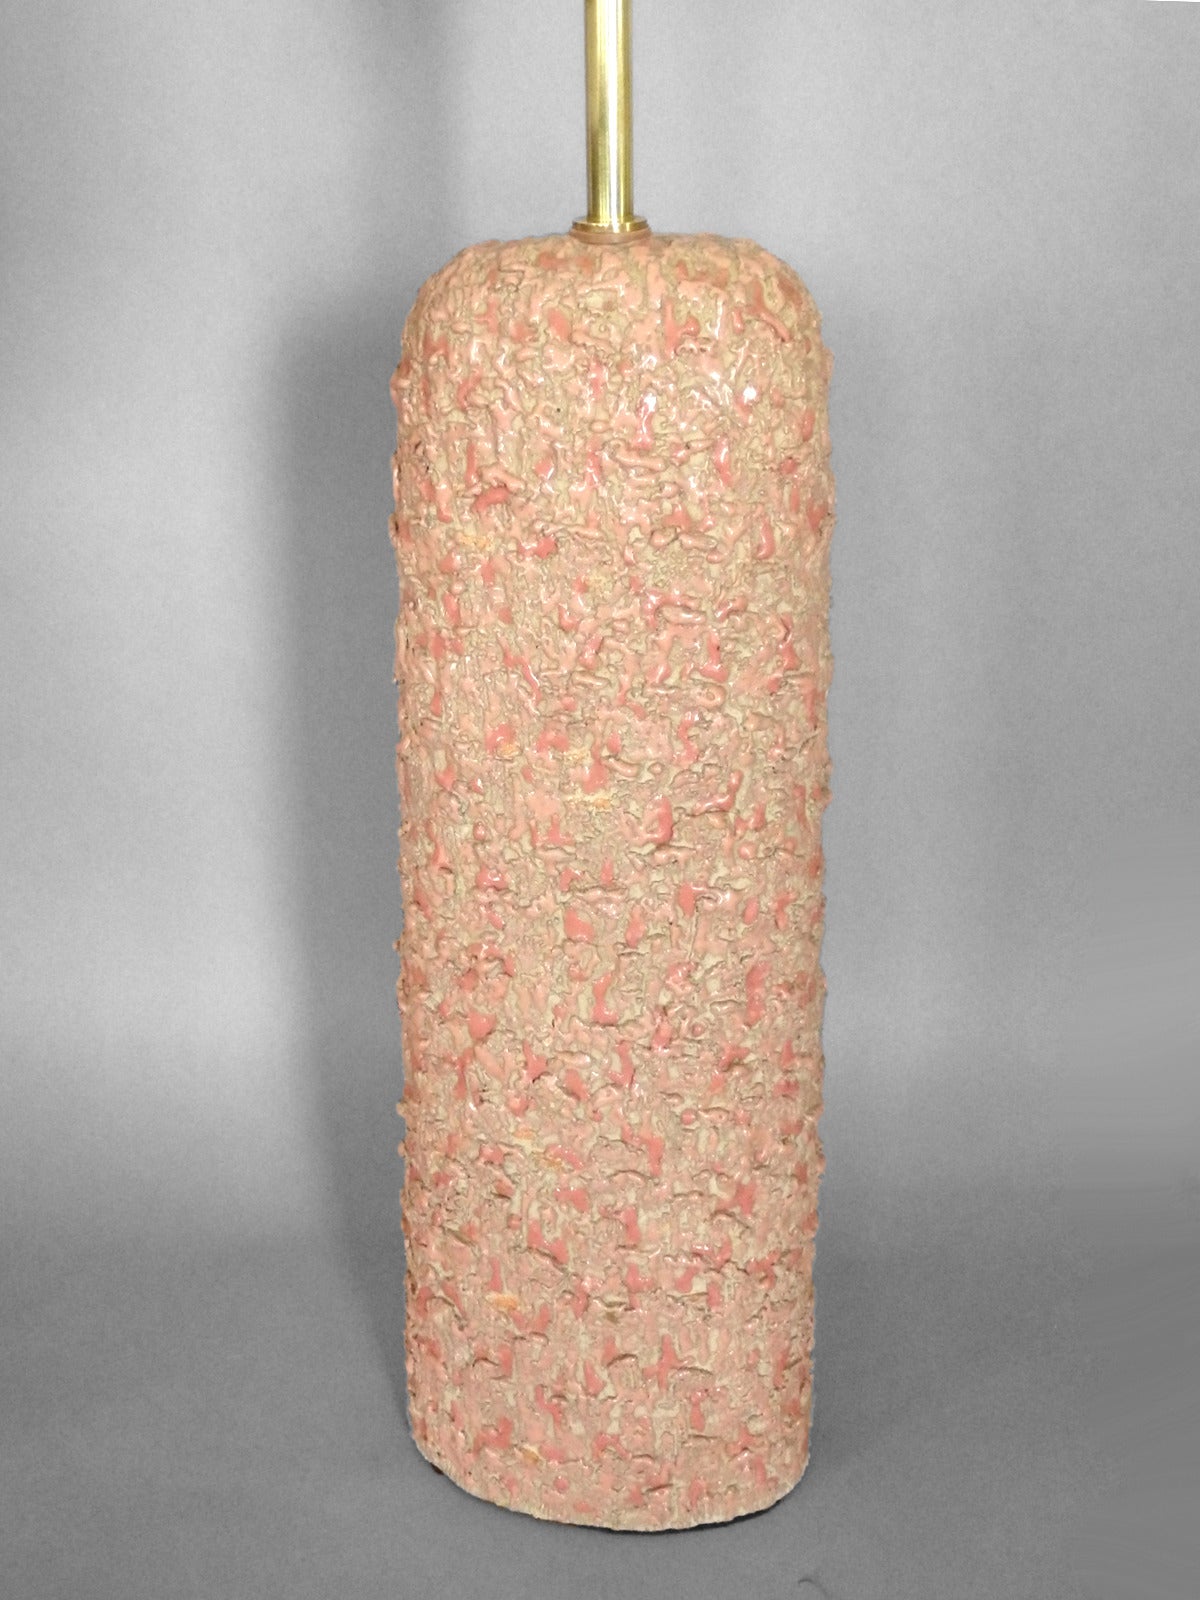 Pair of textured ceramic table lamps by Rita Sargen, Chicago
Measures: 20